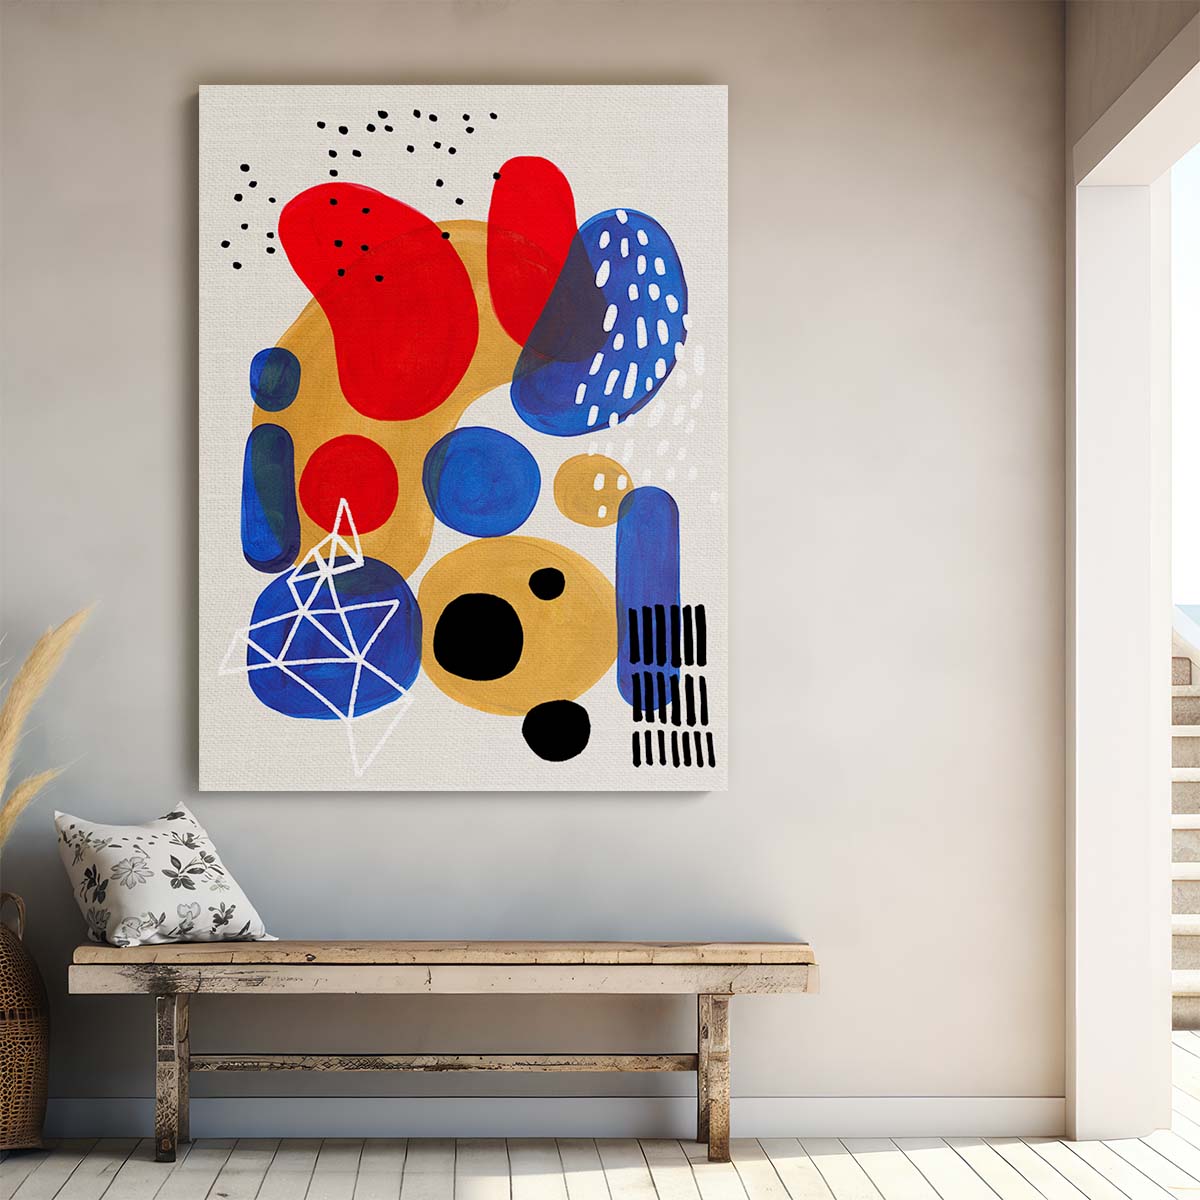 Ejaaz Haniff's Colorful Geometric Illustration Abstract Circles on White by Luxuriance Designs, made in USA